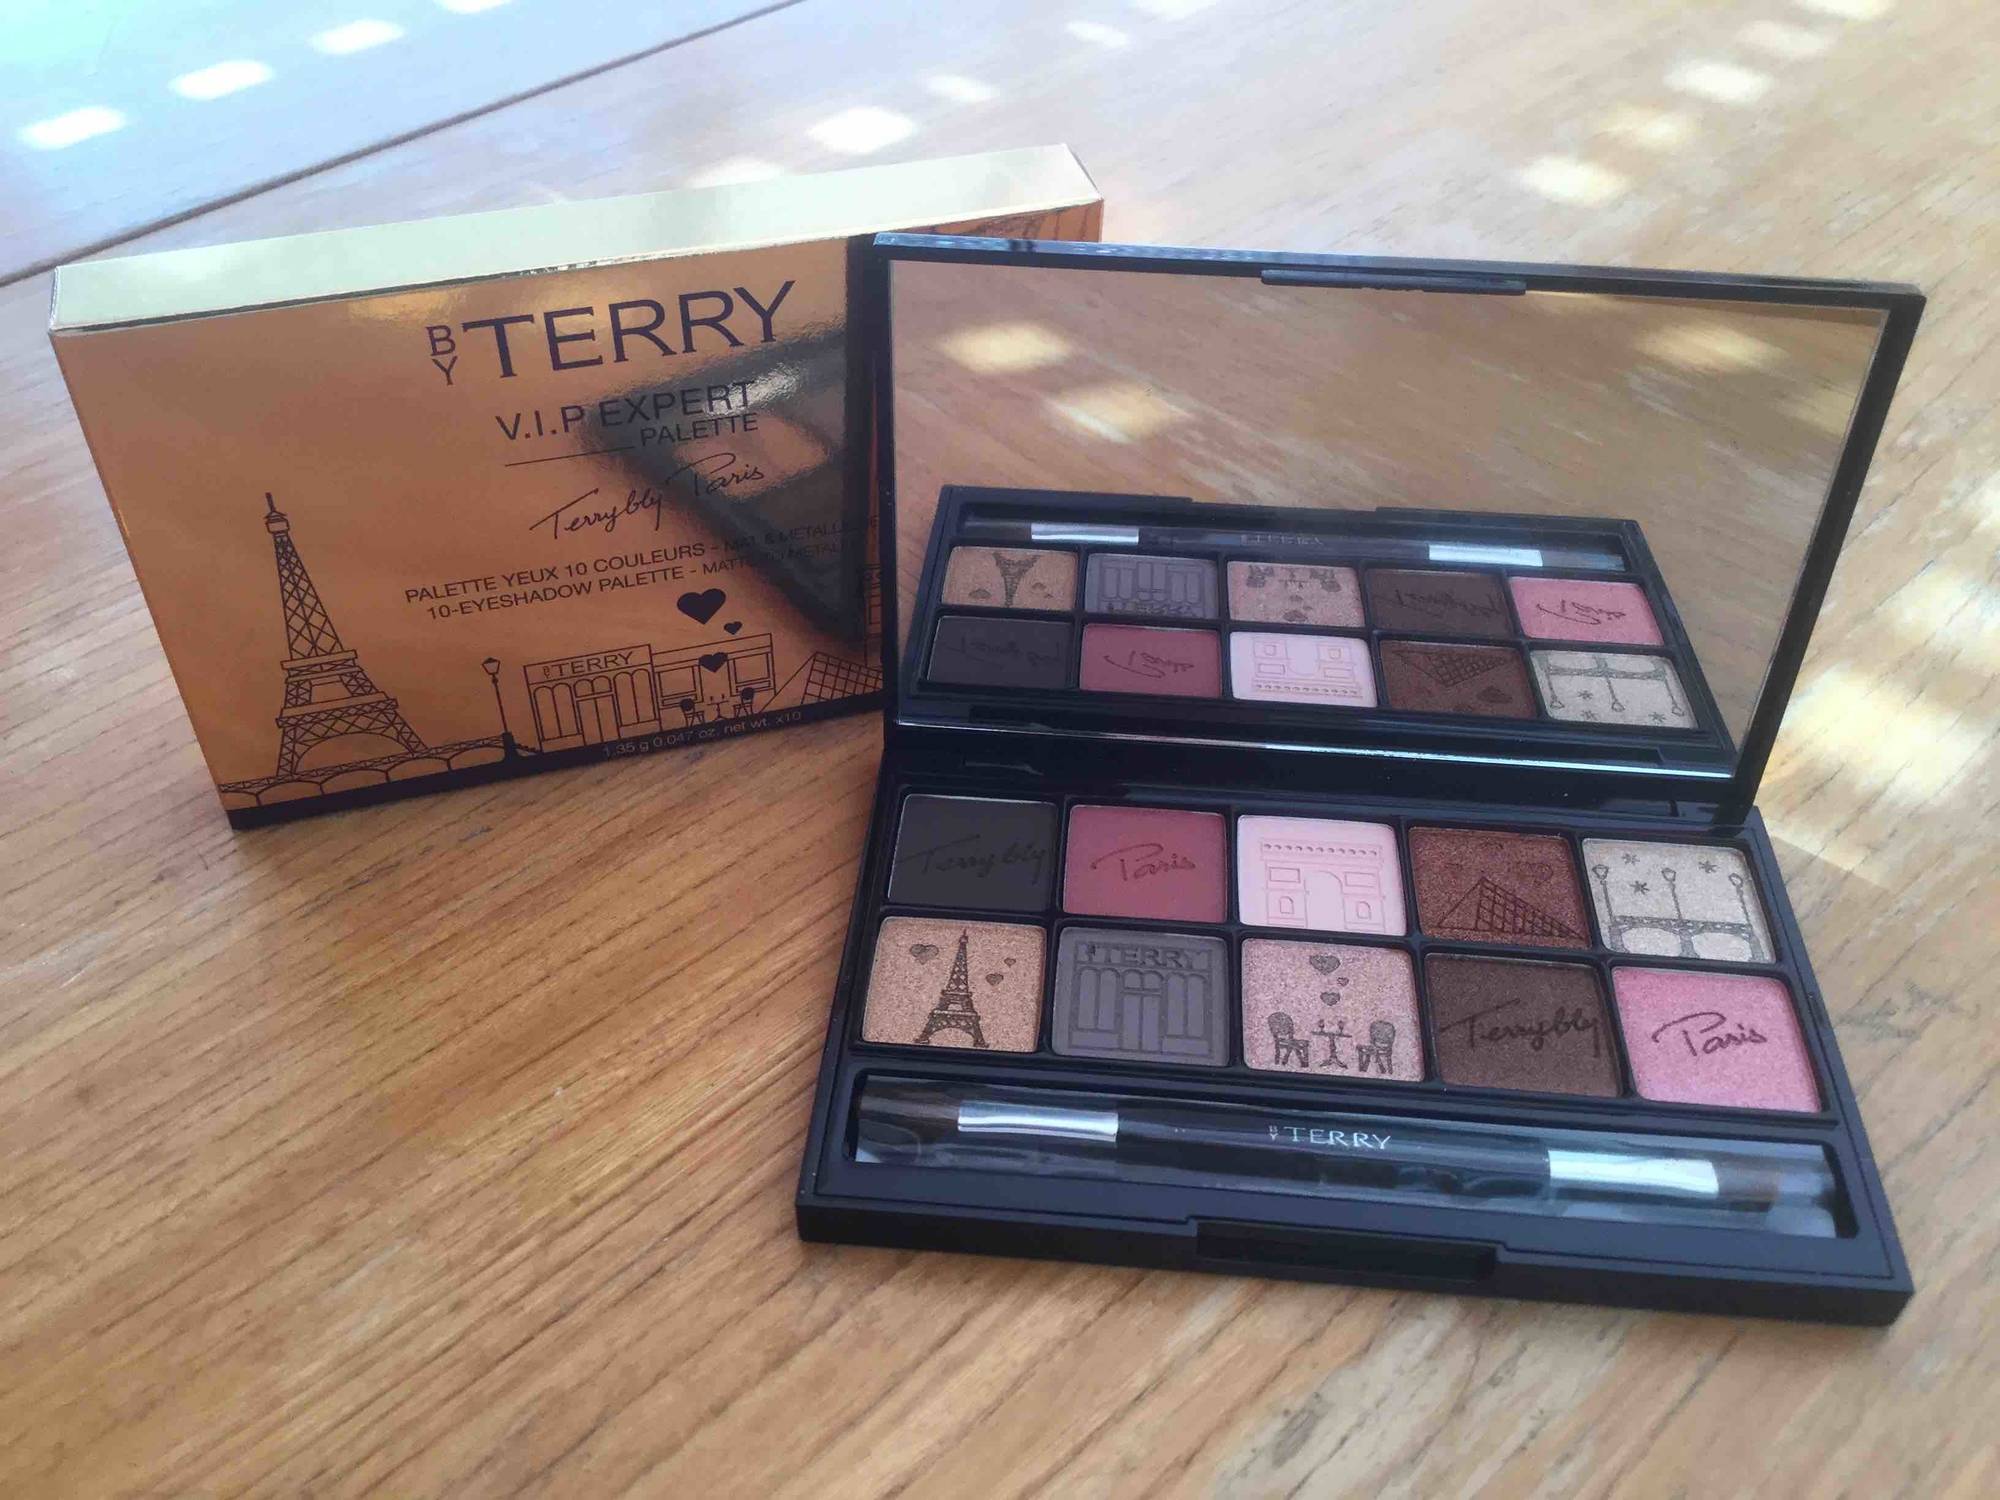 BY TERRY - V.I.P expert - Palette yeux 10 couleurs